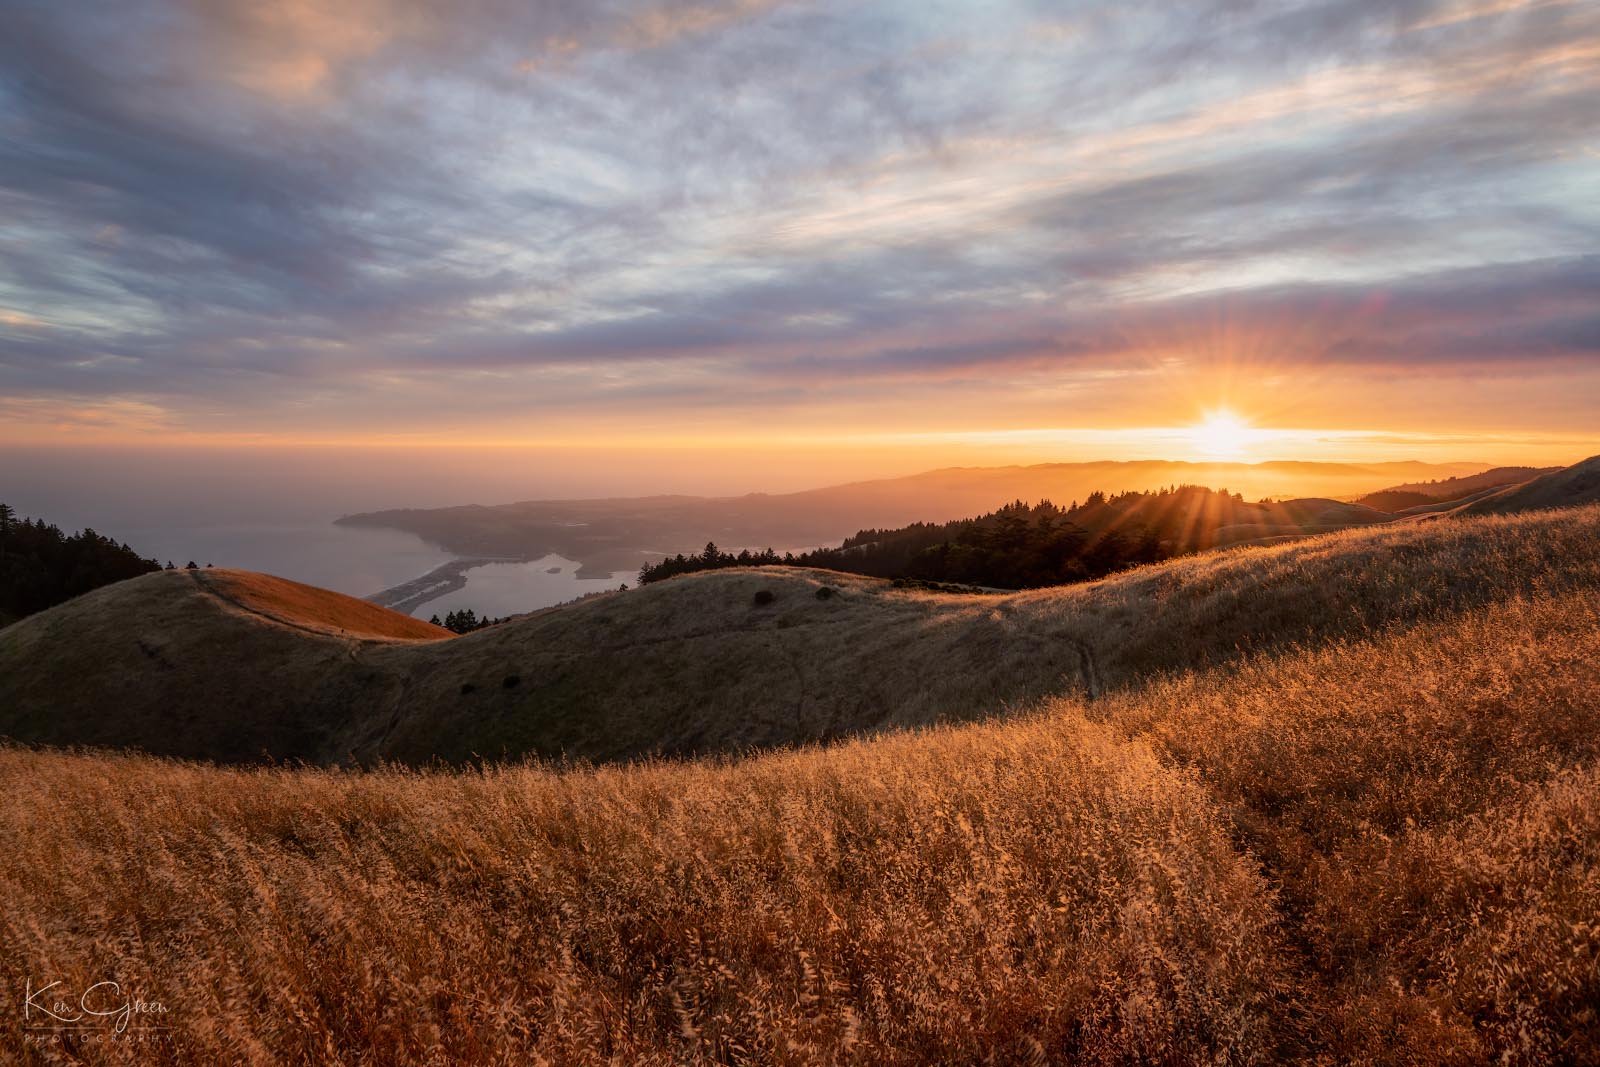 A view of the sun setting over the Pacific Ocean from the peak of Mount Tamalpais in Marin County, California.